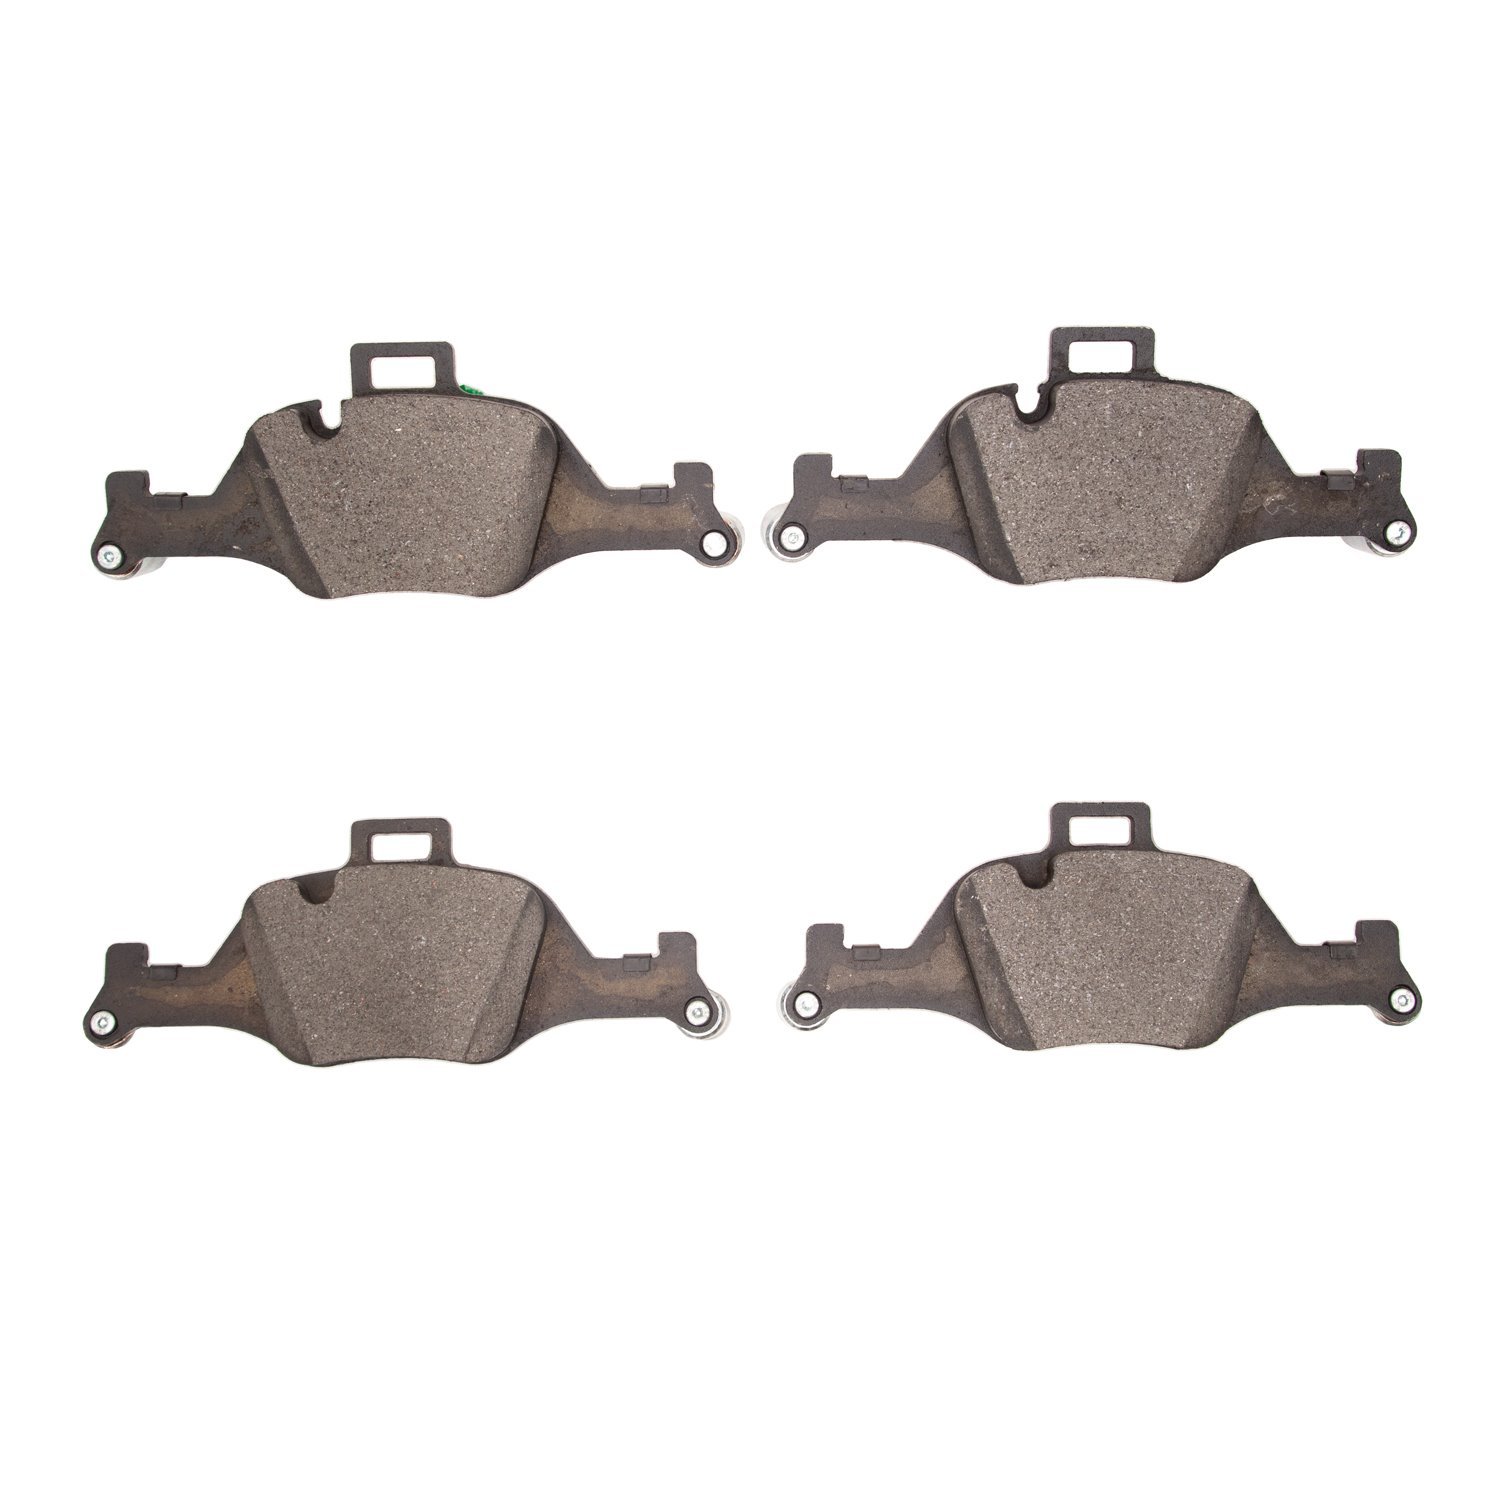 1310-2060-00 3000-Series Ceramic Brake Pads, Fits Select BMW, Position: Front